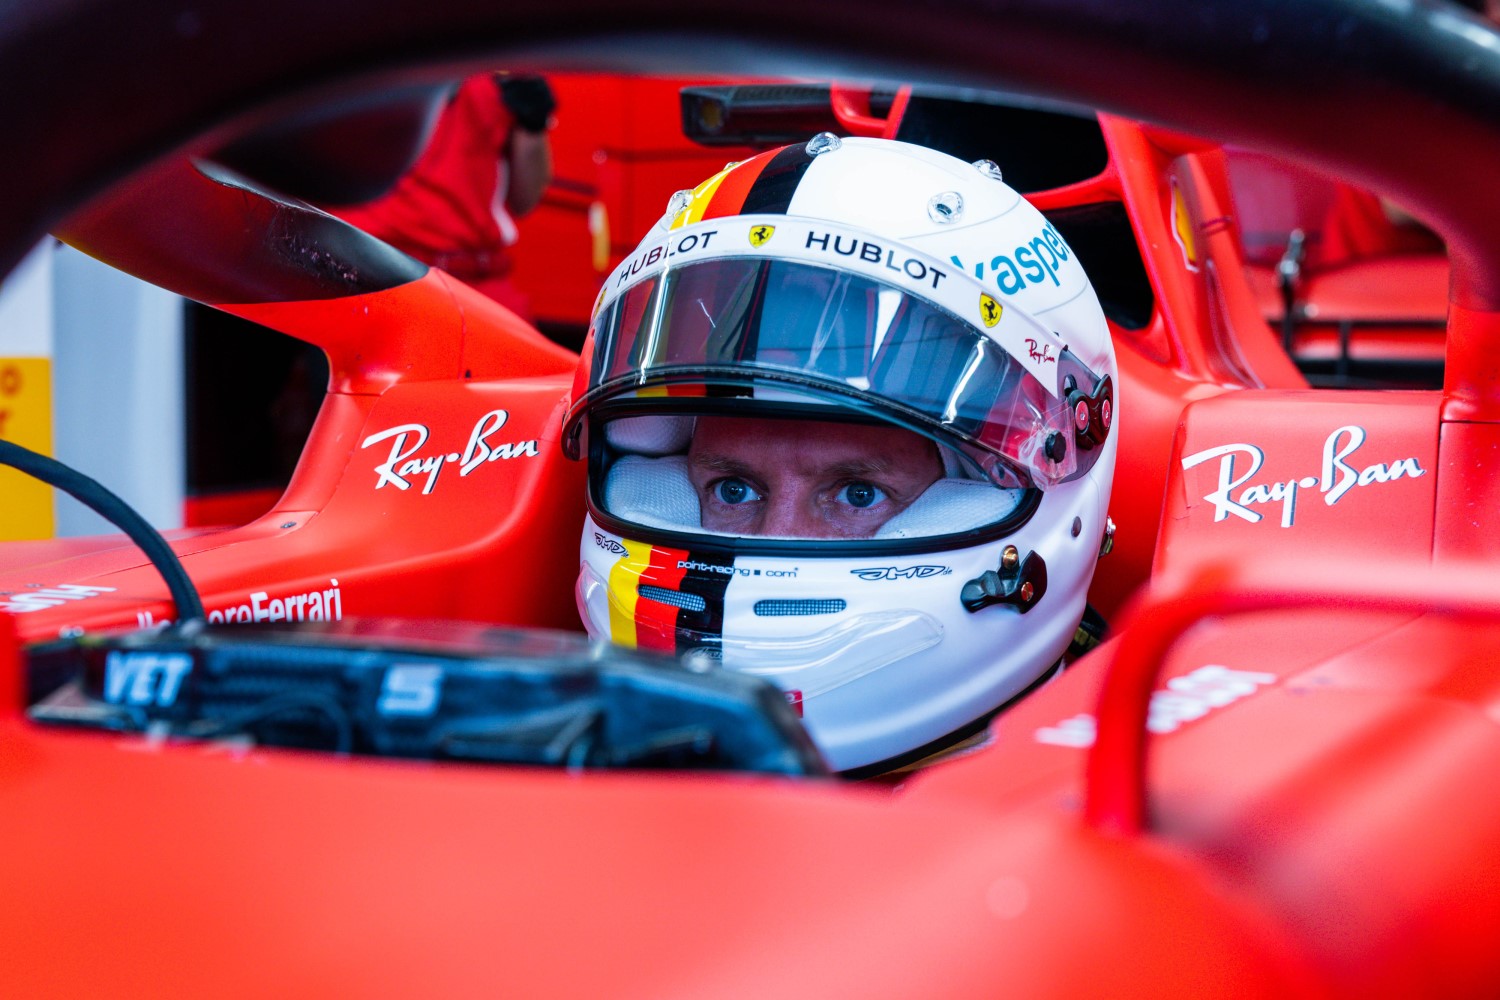 Why has Vettel out-qualified Leclerc two straight races? Is it becuase Vettel has stopped helping the Ferrari 'pet' driver?